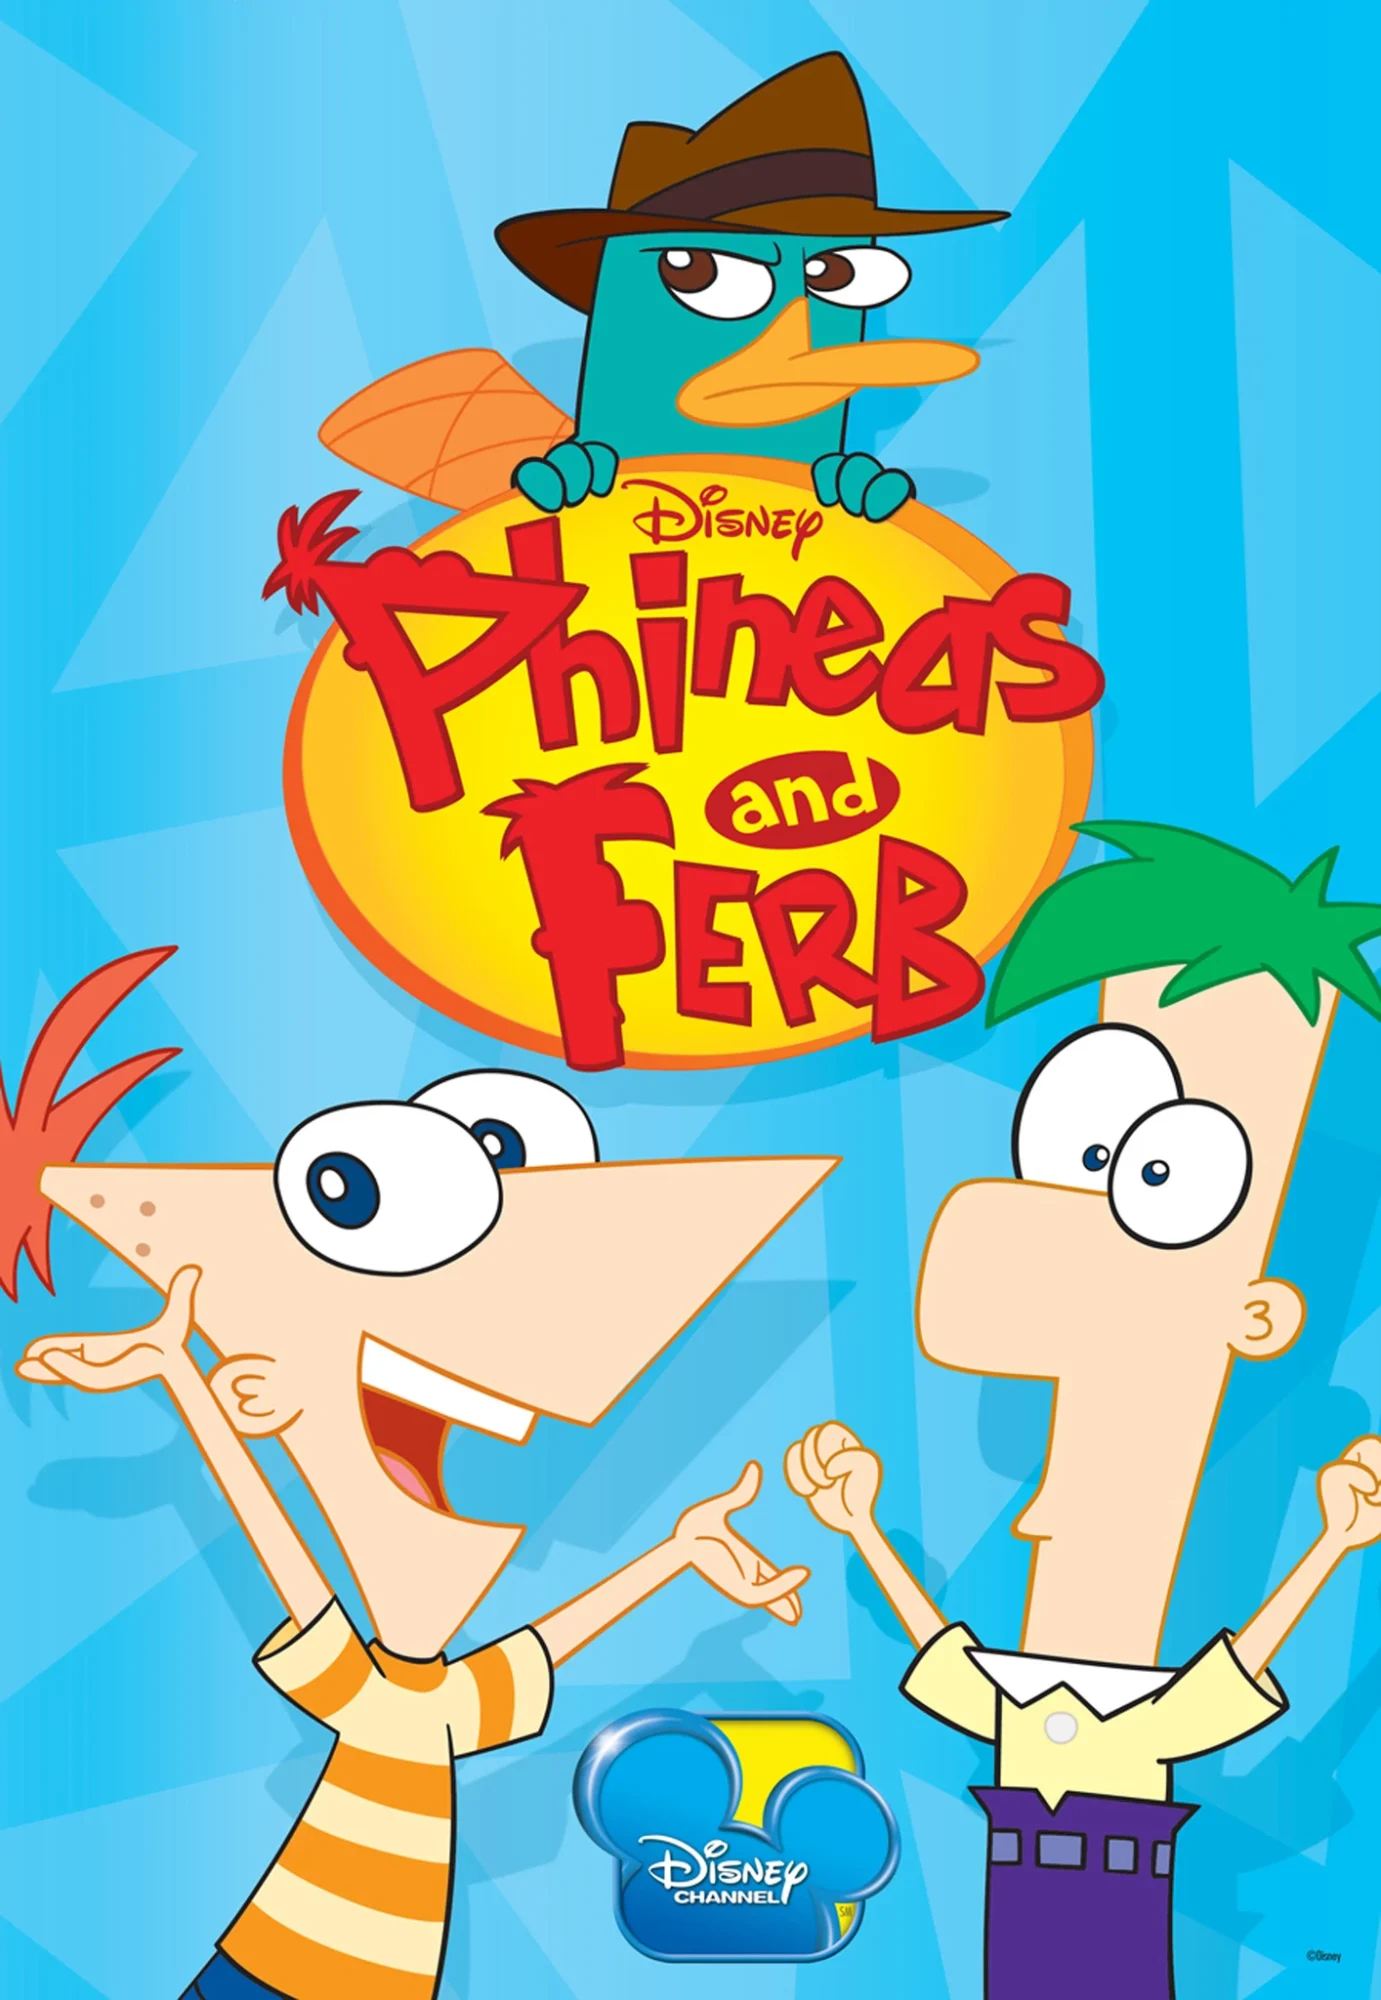 Phineas and ferb 90s